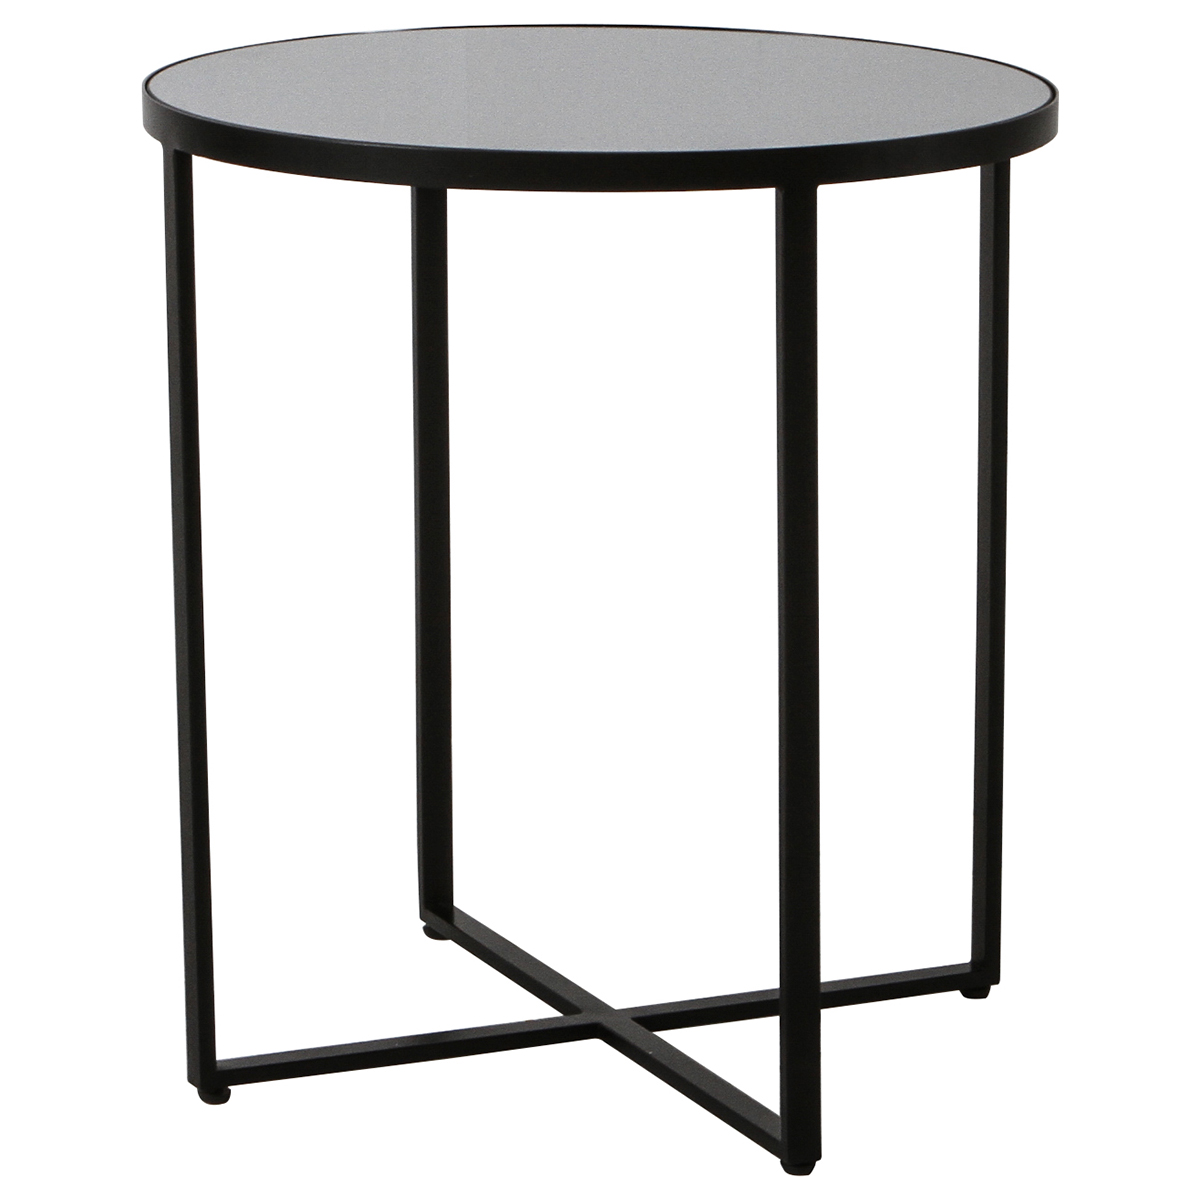 Gallery Direct Torrance Side Table